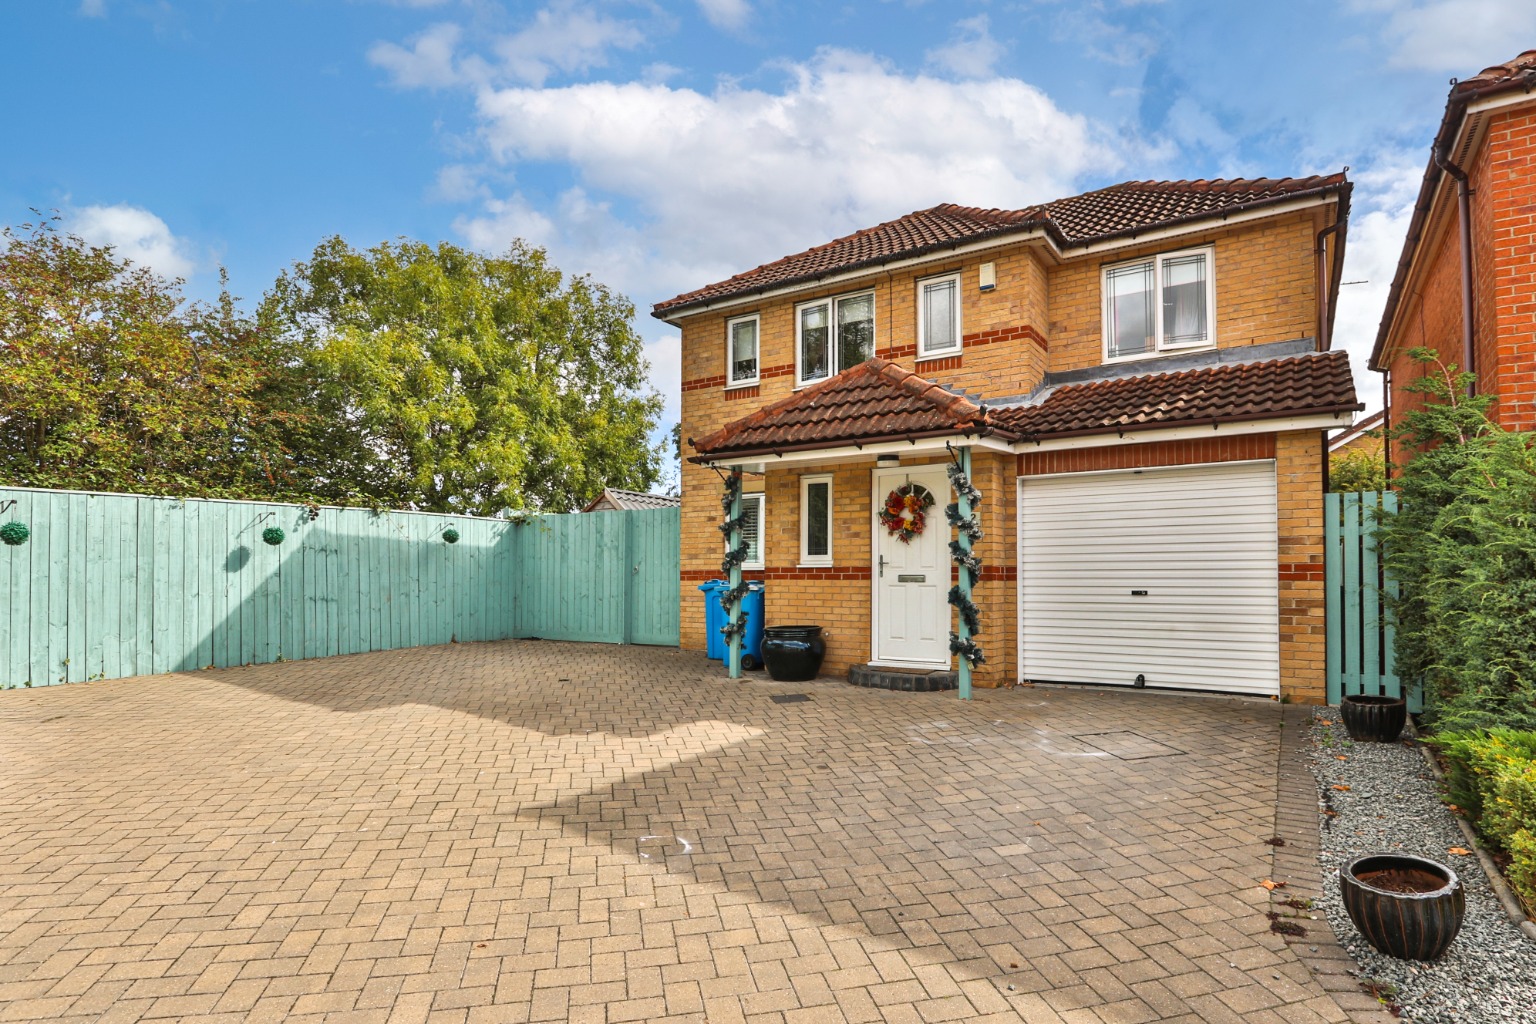 4 bed detached house for sale in Kelberdale Close, Hull - Property Image 1